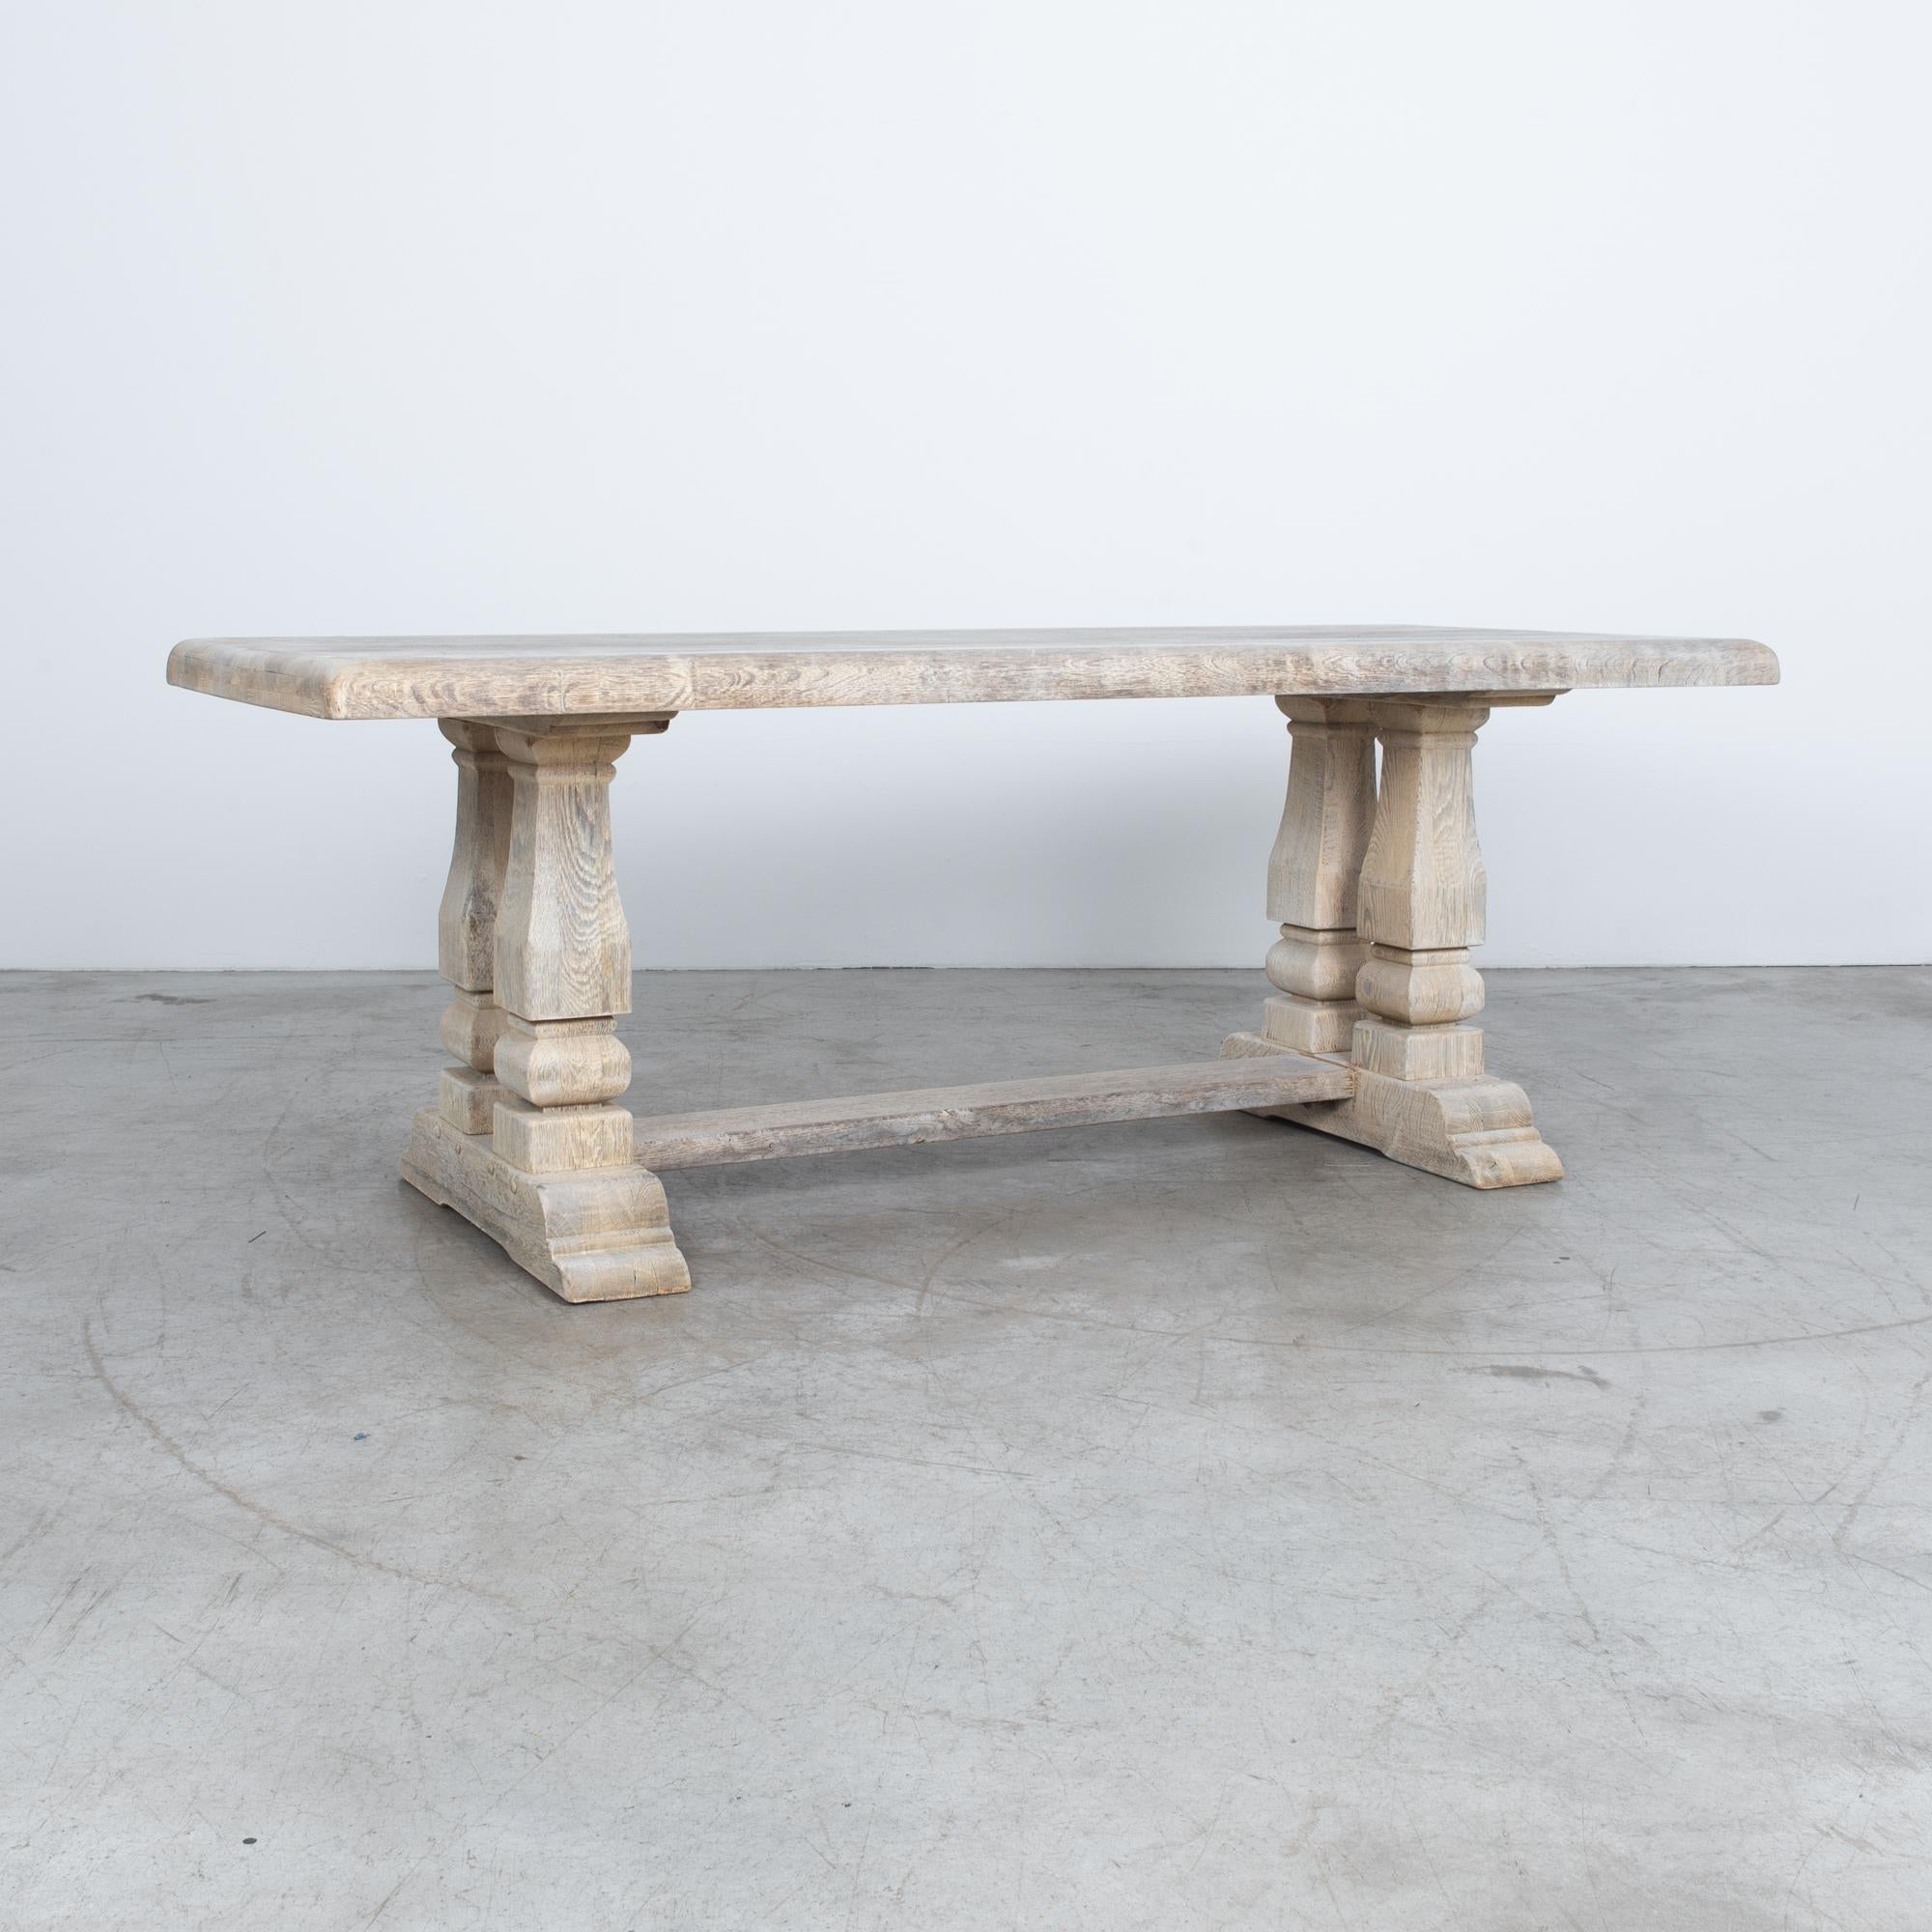 Just the Belgian farmhouse dining table you were looking for, with thick top and sturdy legs. Updated with our signature bleached oak technique.

A Popular style in mid-20th century Belgium, simple wooden forms recall the countryside ideal. This